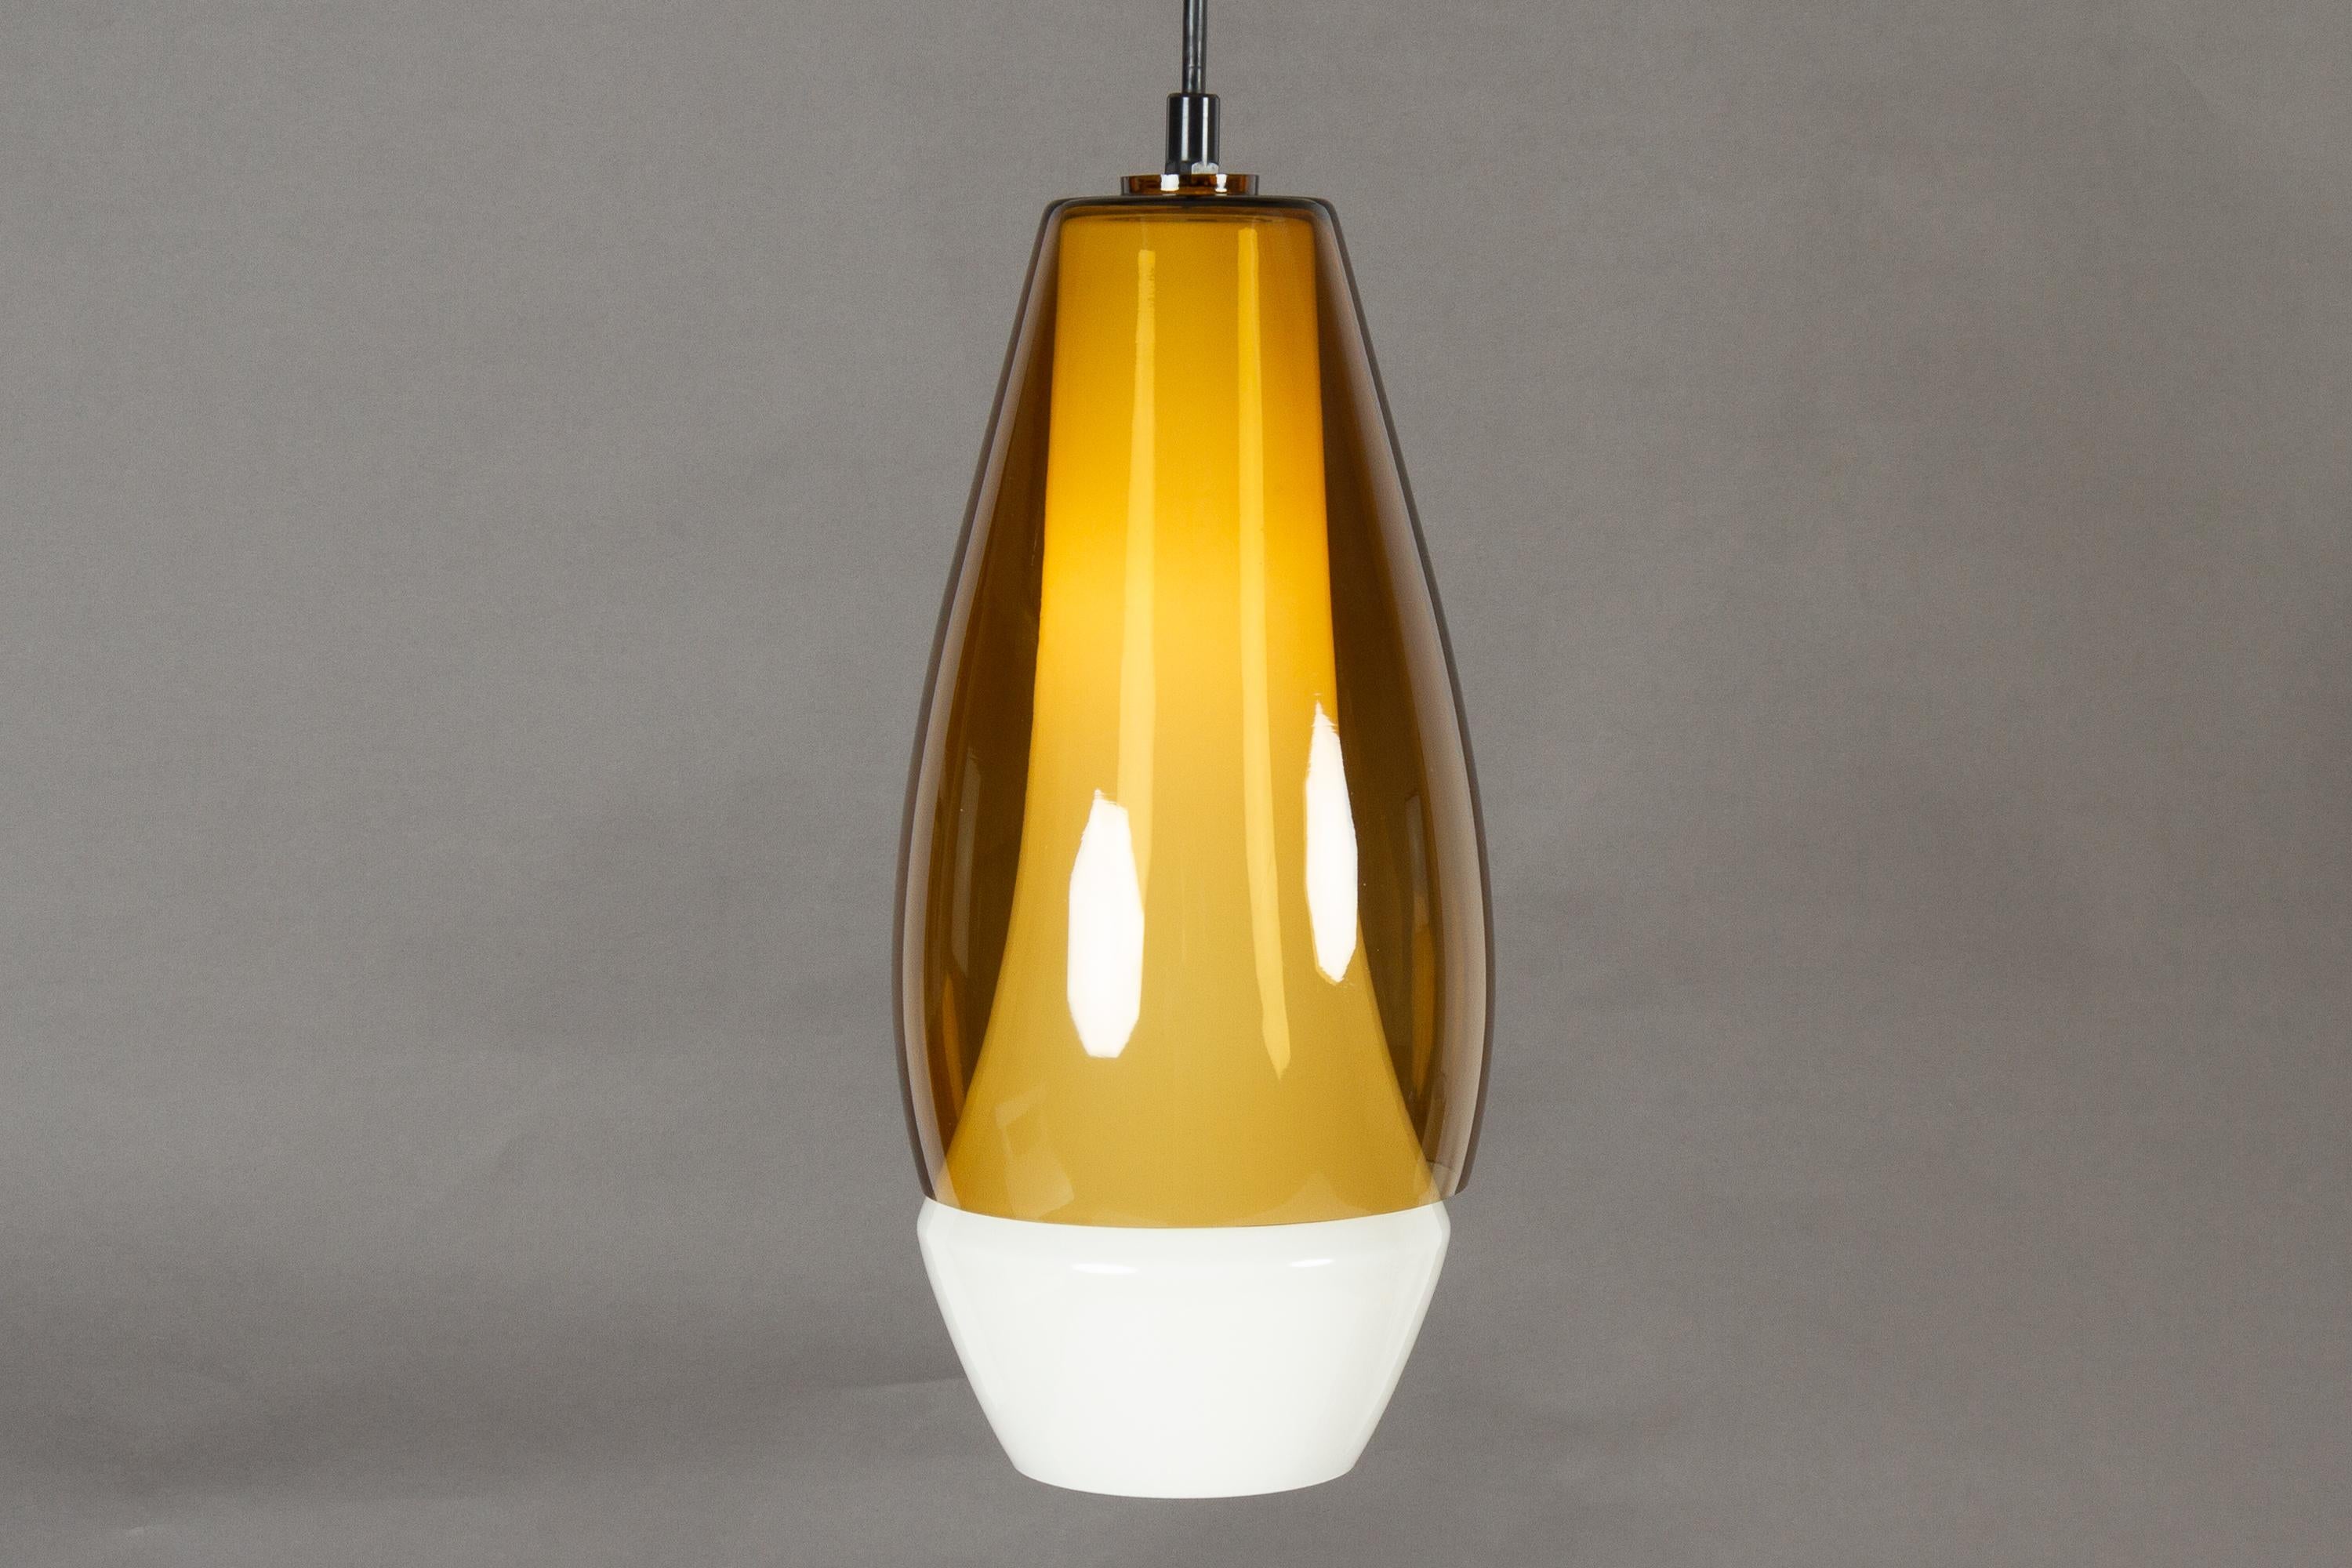 Mid-Century Modern Double Mouth-Blown Glass Pendant by Fog & Mørup, 1960s